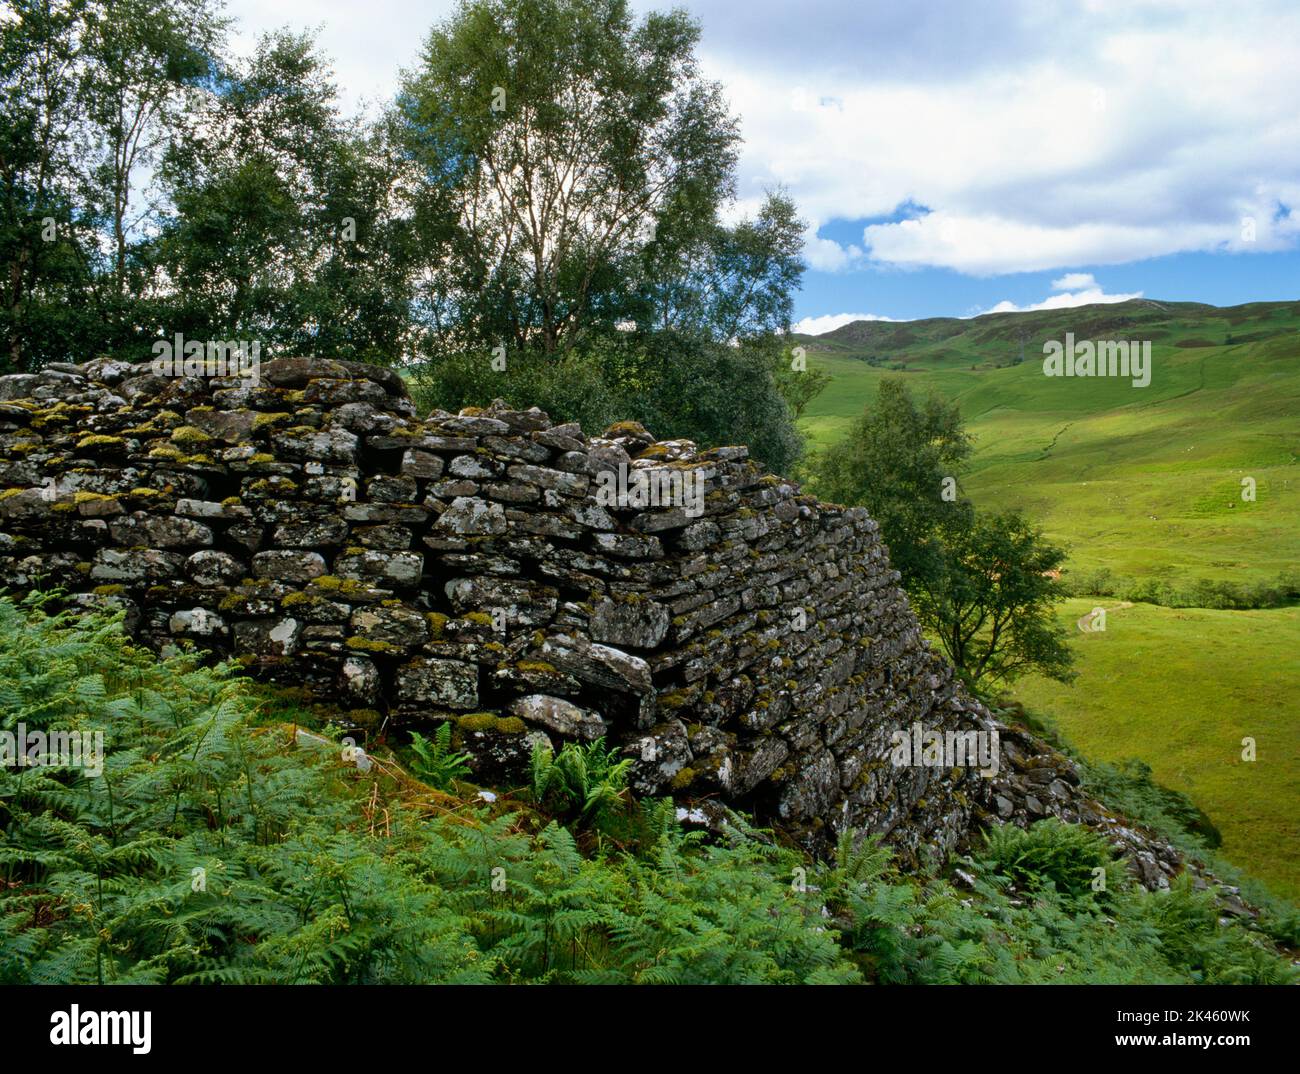 Exterior view looking N of Dun Grugaig Iron Age fort, Glenelg, Scotland, UK, on a rocky outcrop above a gorge of the Abhainn a Ghlinne Bhig river. Stock Photo